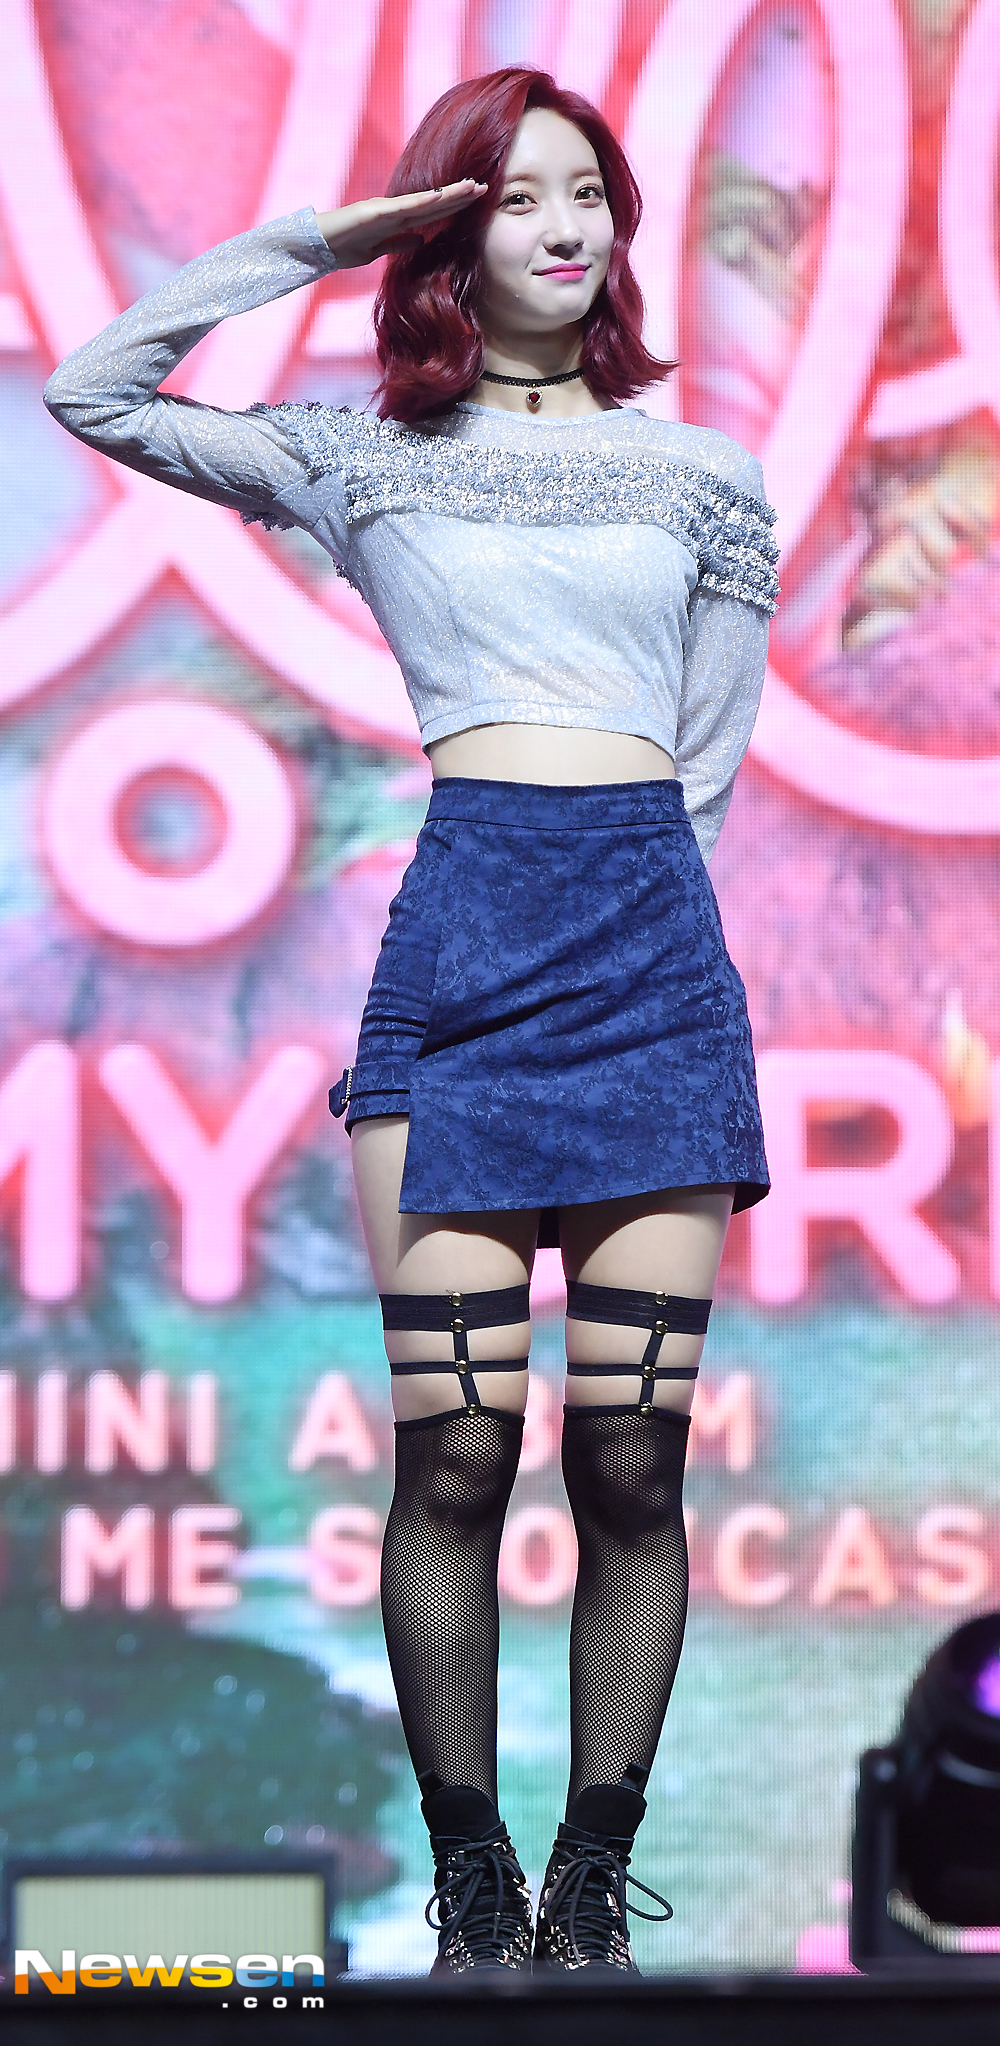 OH MY GIRL (Hyo Jeong, Mimi, Young Hee, JiHo, Arin, Binnie) mini album Remember me showcase was held at Gwangjang Dong Yes 24 Live Hall in Gwangjin-gu, Seoul on the afternoon of September 10OH MY GIRL Binnie is responding to the photo pose.expressiveness